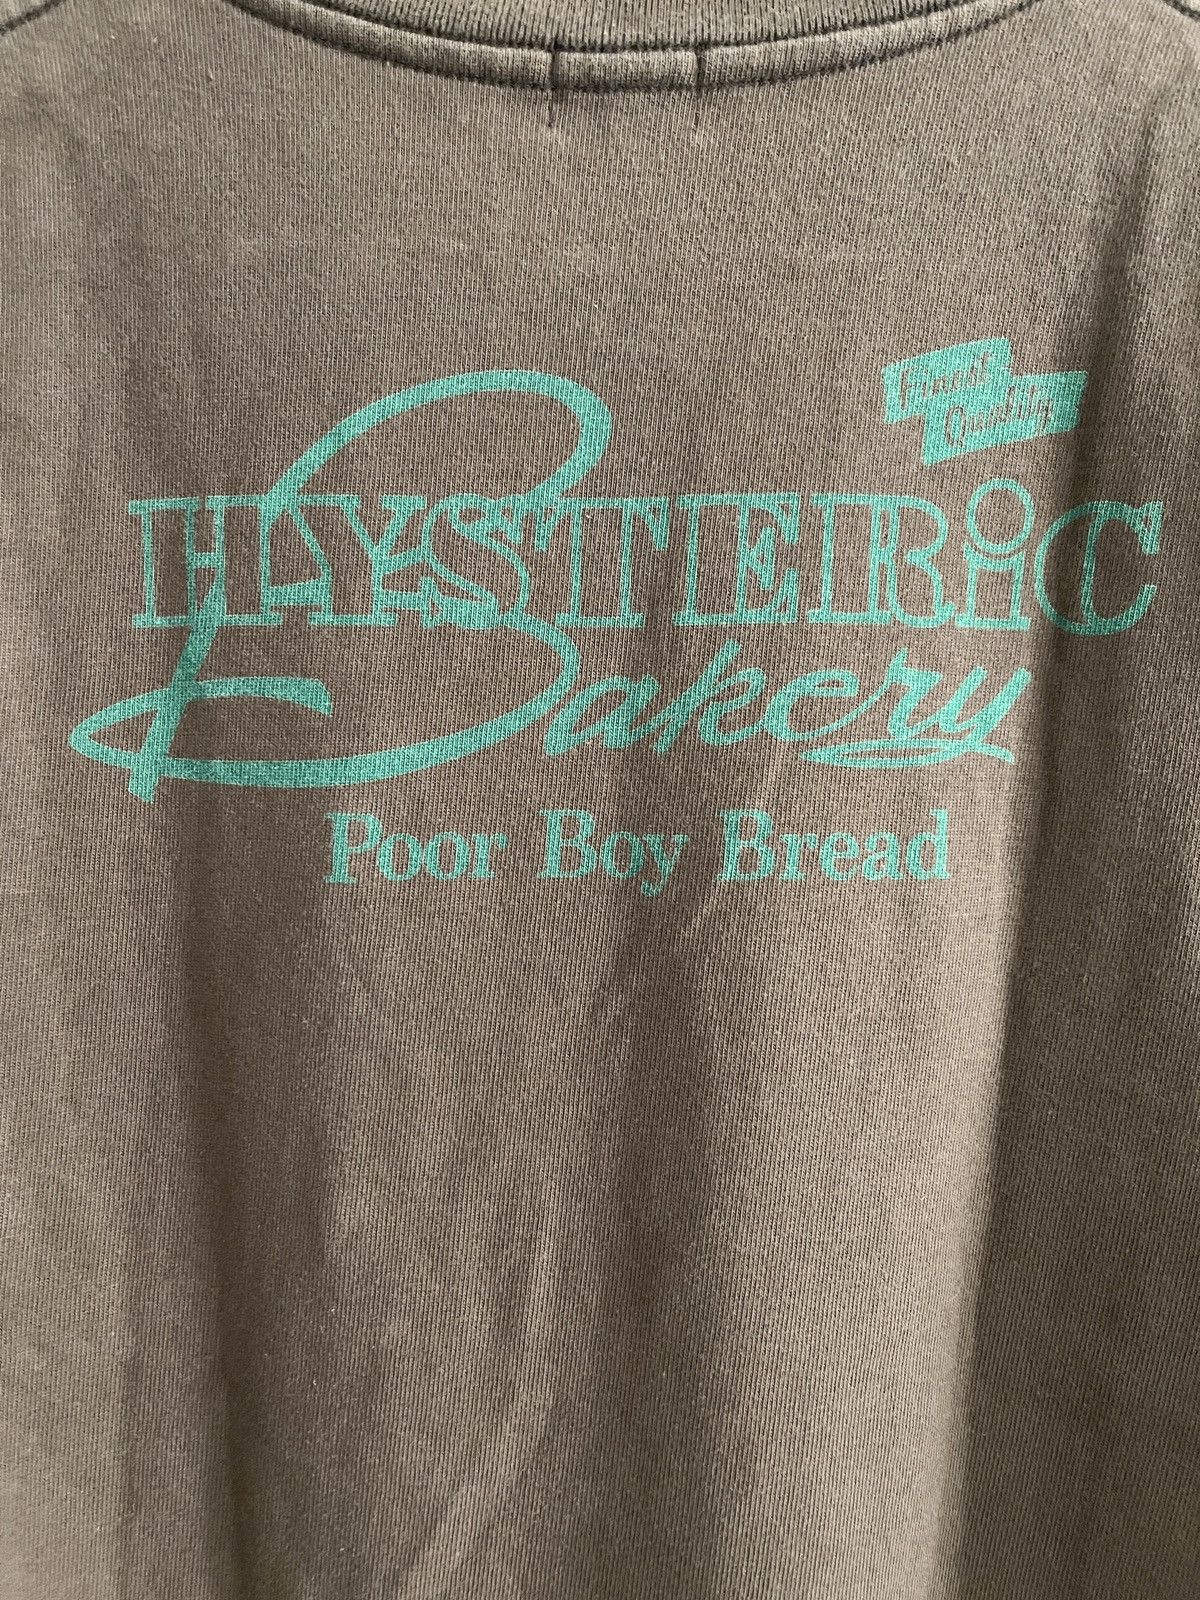 Vintage - STEAL! 2010s Hysteric Glamour Bakery Girl Pocket Tee (S) - 5